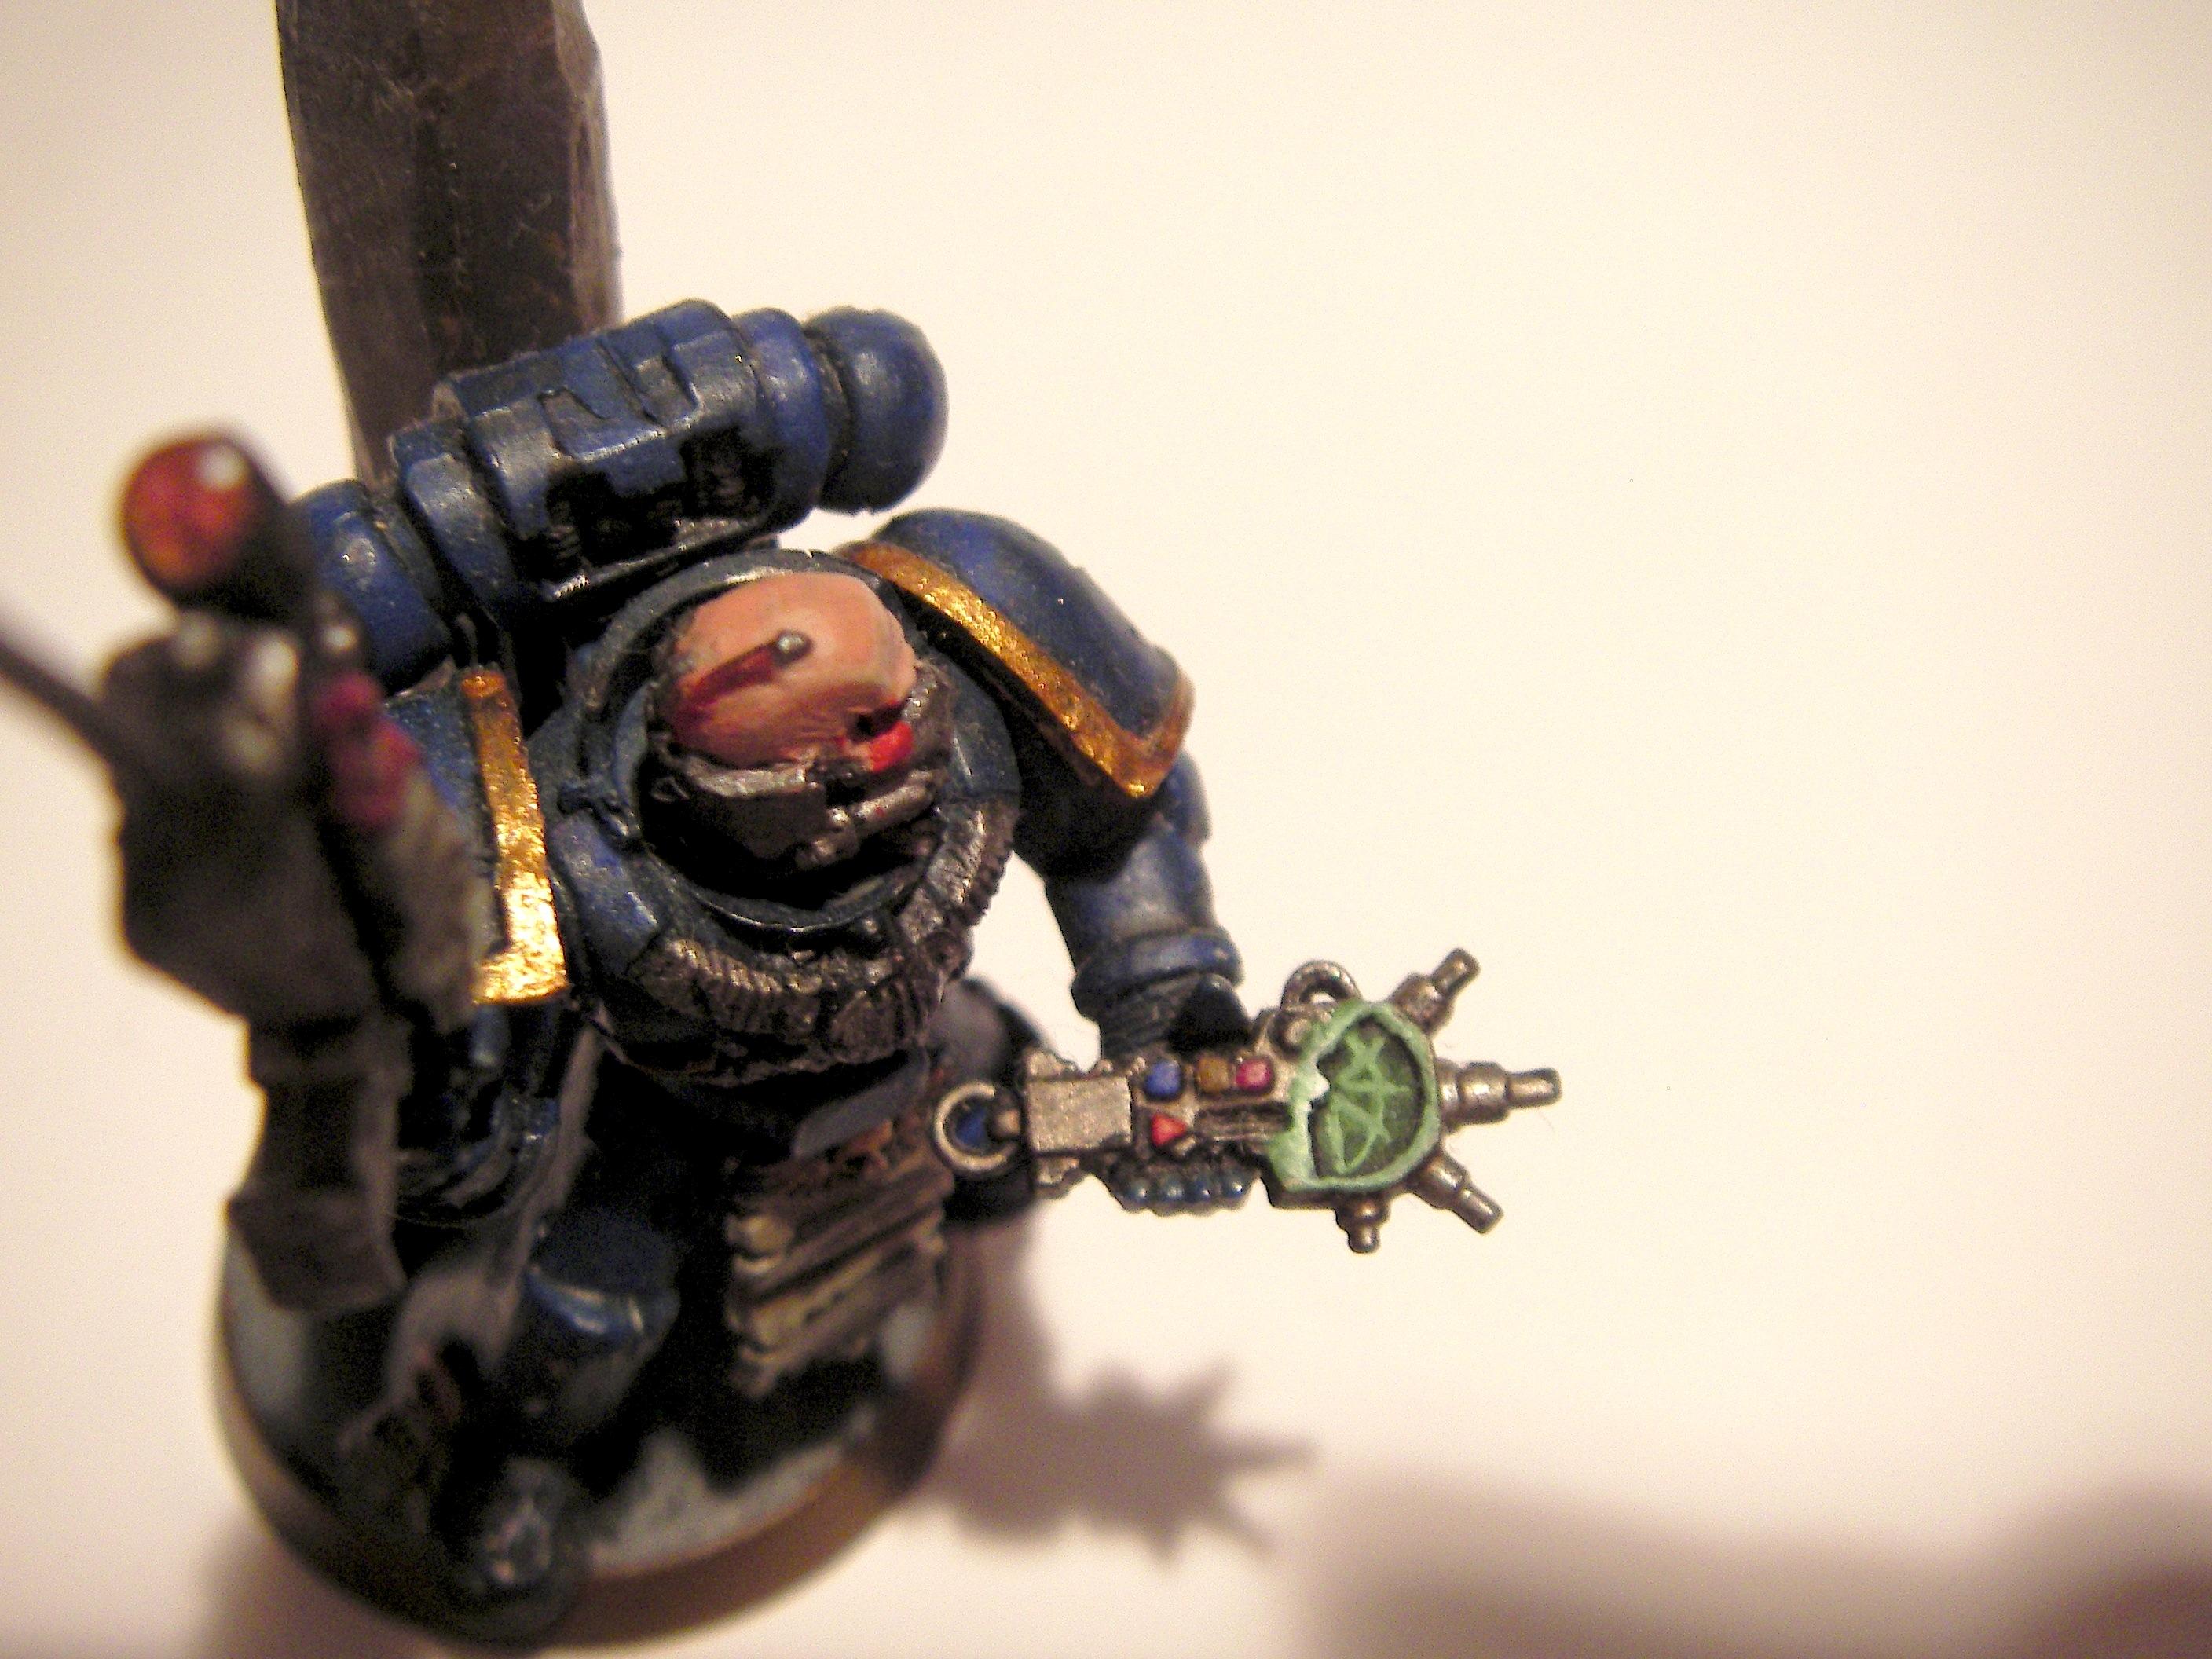 Conversion, Object Source Lighting, Snipers, Space Marines, Ultramarines, Warhammer 40,000